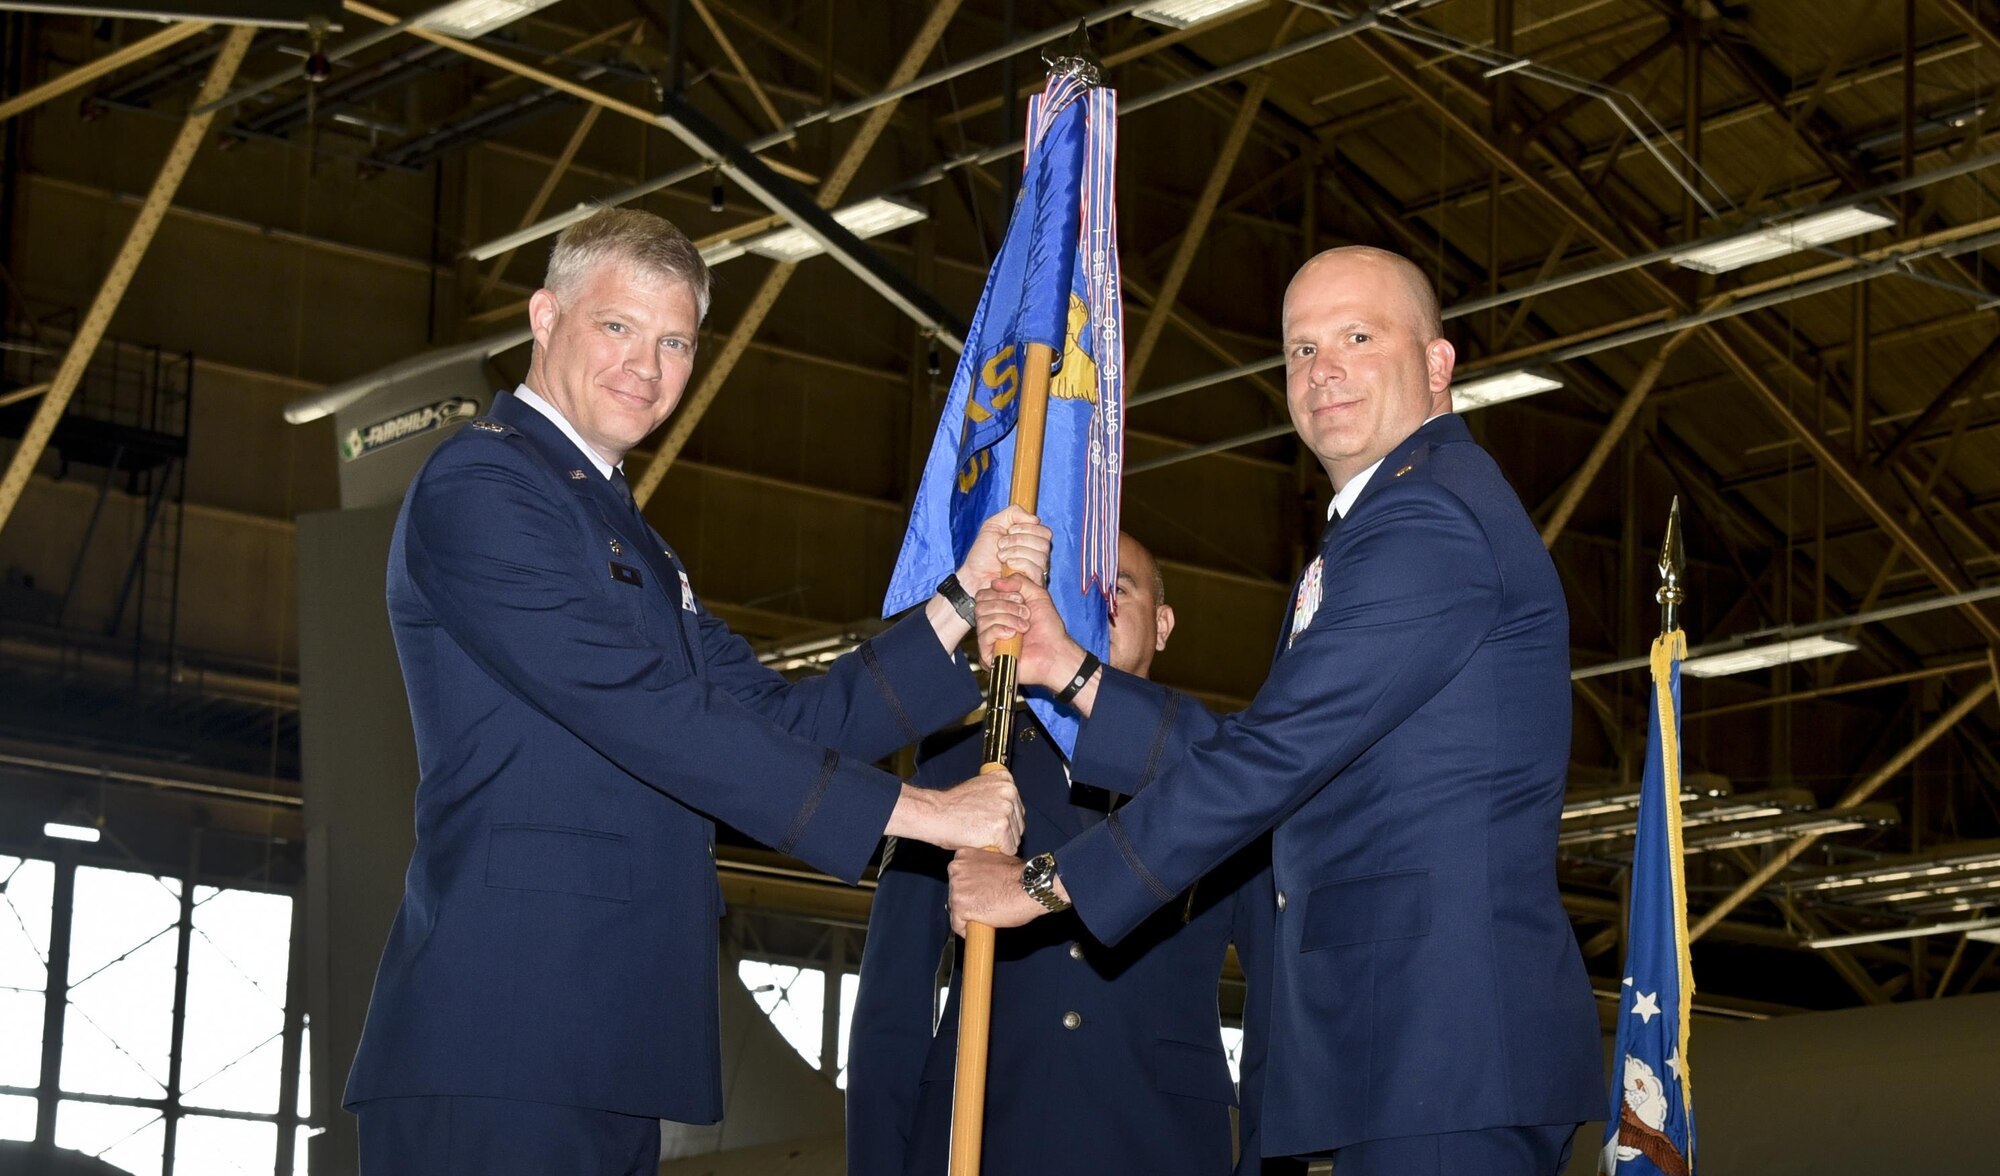 Col. Alan Hart, 92nd Maintenance Group commander, passes the 92nd Maintenance Squadron guidon to Maj. Robert Corsi, 92nd MXS commander, during the change of command ceremony July 1, 2016, at Fairchild Air Force Base, Wash. Corsi was previously at Maxwell Air Force Base, Alabama, attending the Air Command and Staff College. (U.S. Air Force photo/Airman 1st Class Taylor Shelton)